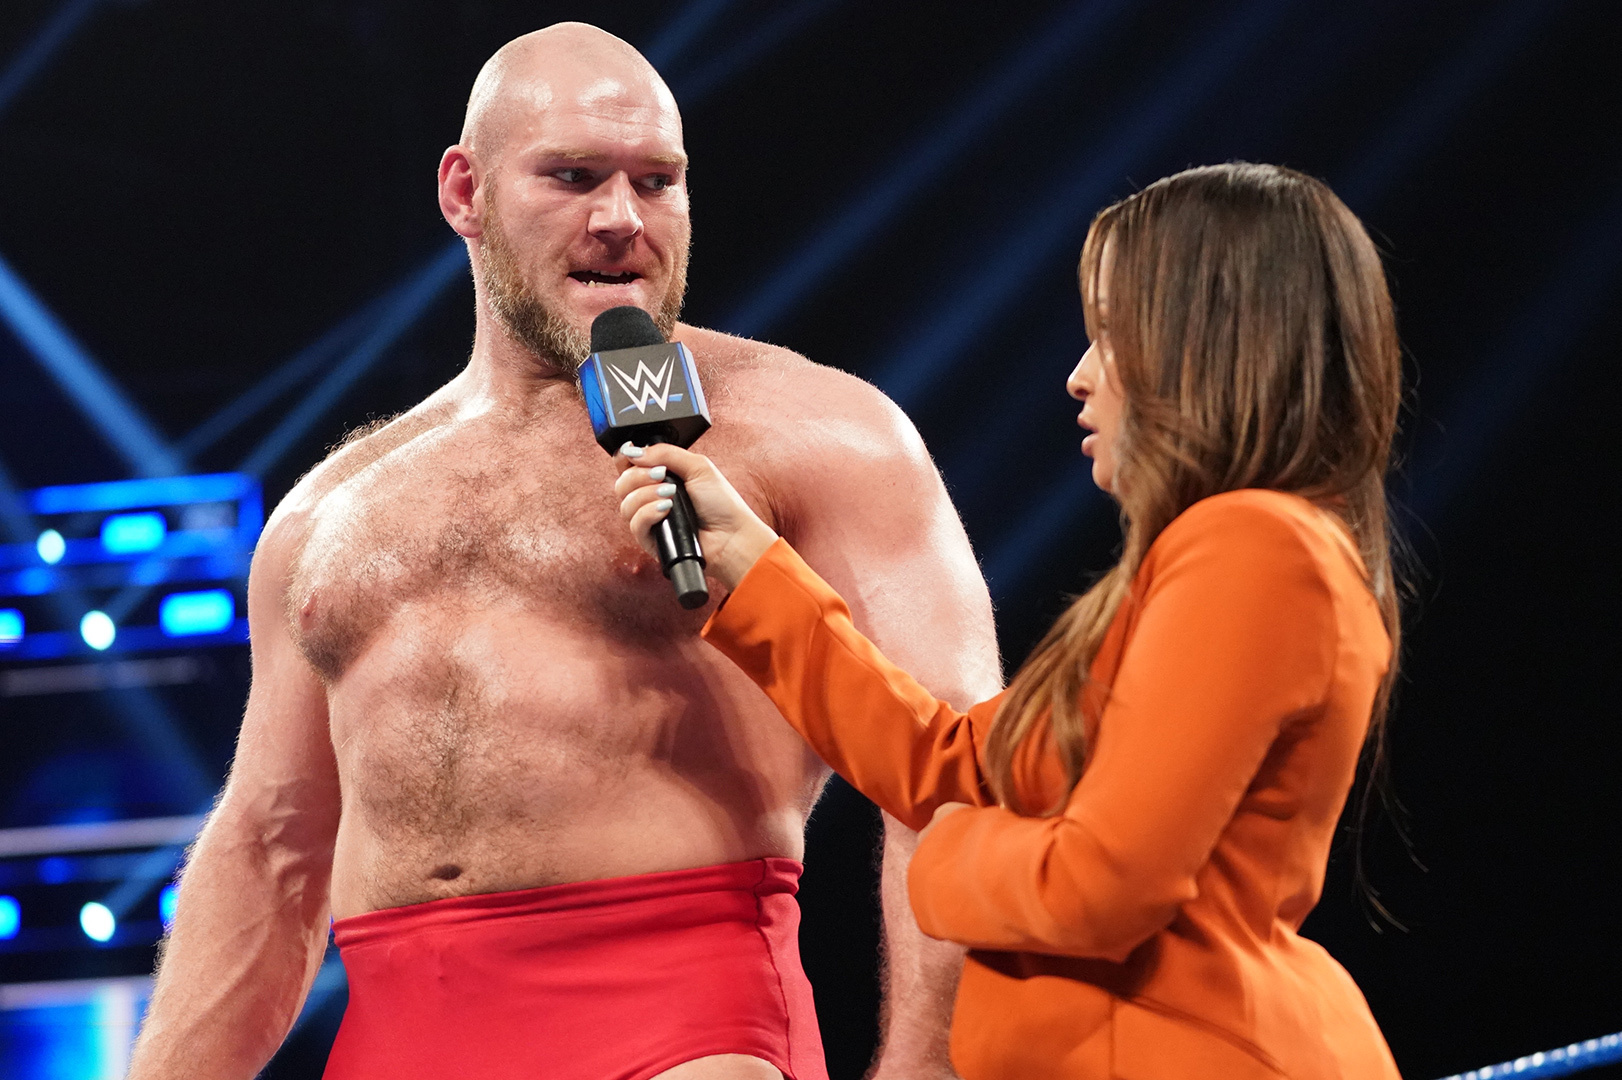 Professional Wrestler Lars Sullivan Faces Accusations of Threatening Spa Employee Through Voicemail